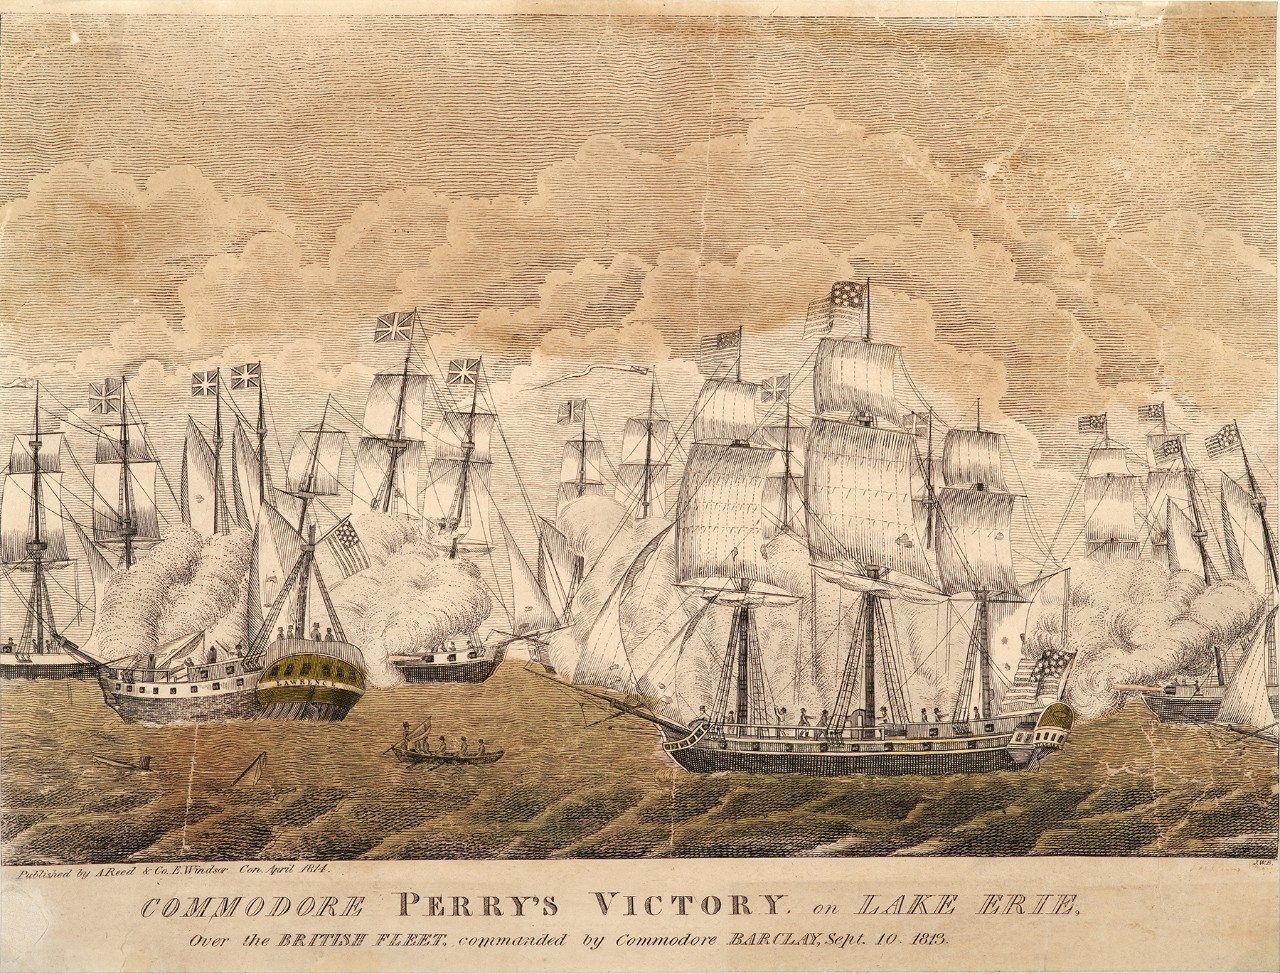 A ship battle between a two groups of ships partly obscured by smoke, in the foreground is group of men in a boat moving between the ships